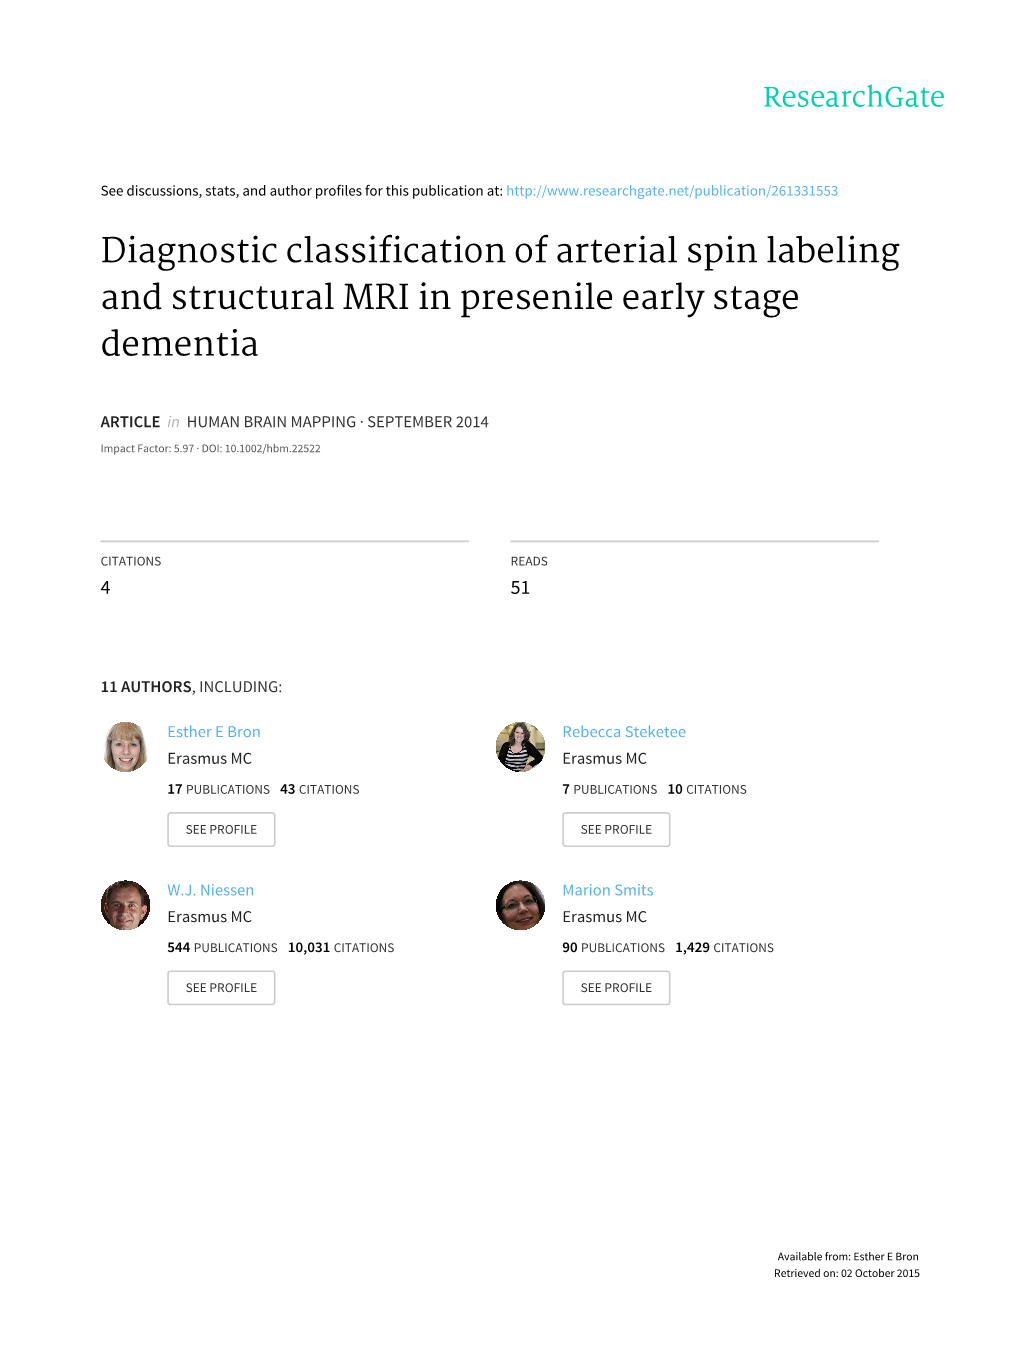 Diagnostic Classification of Arterial Spin Labeling and Structural MRI in Presenile Early Stage Dementia